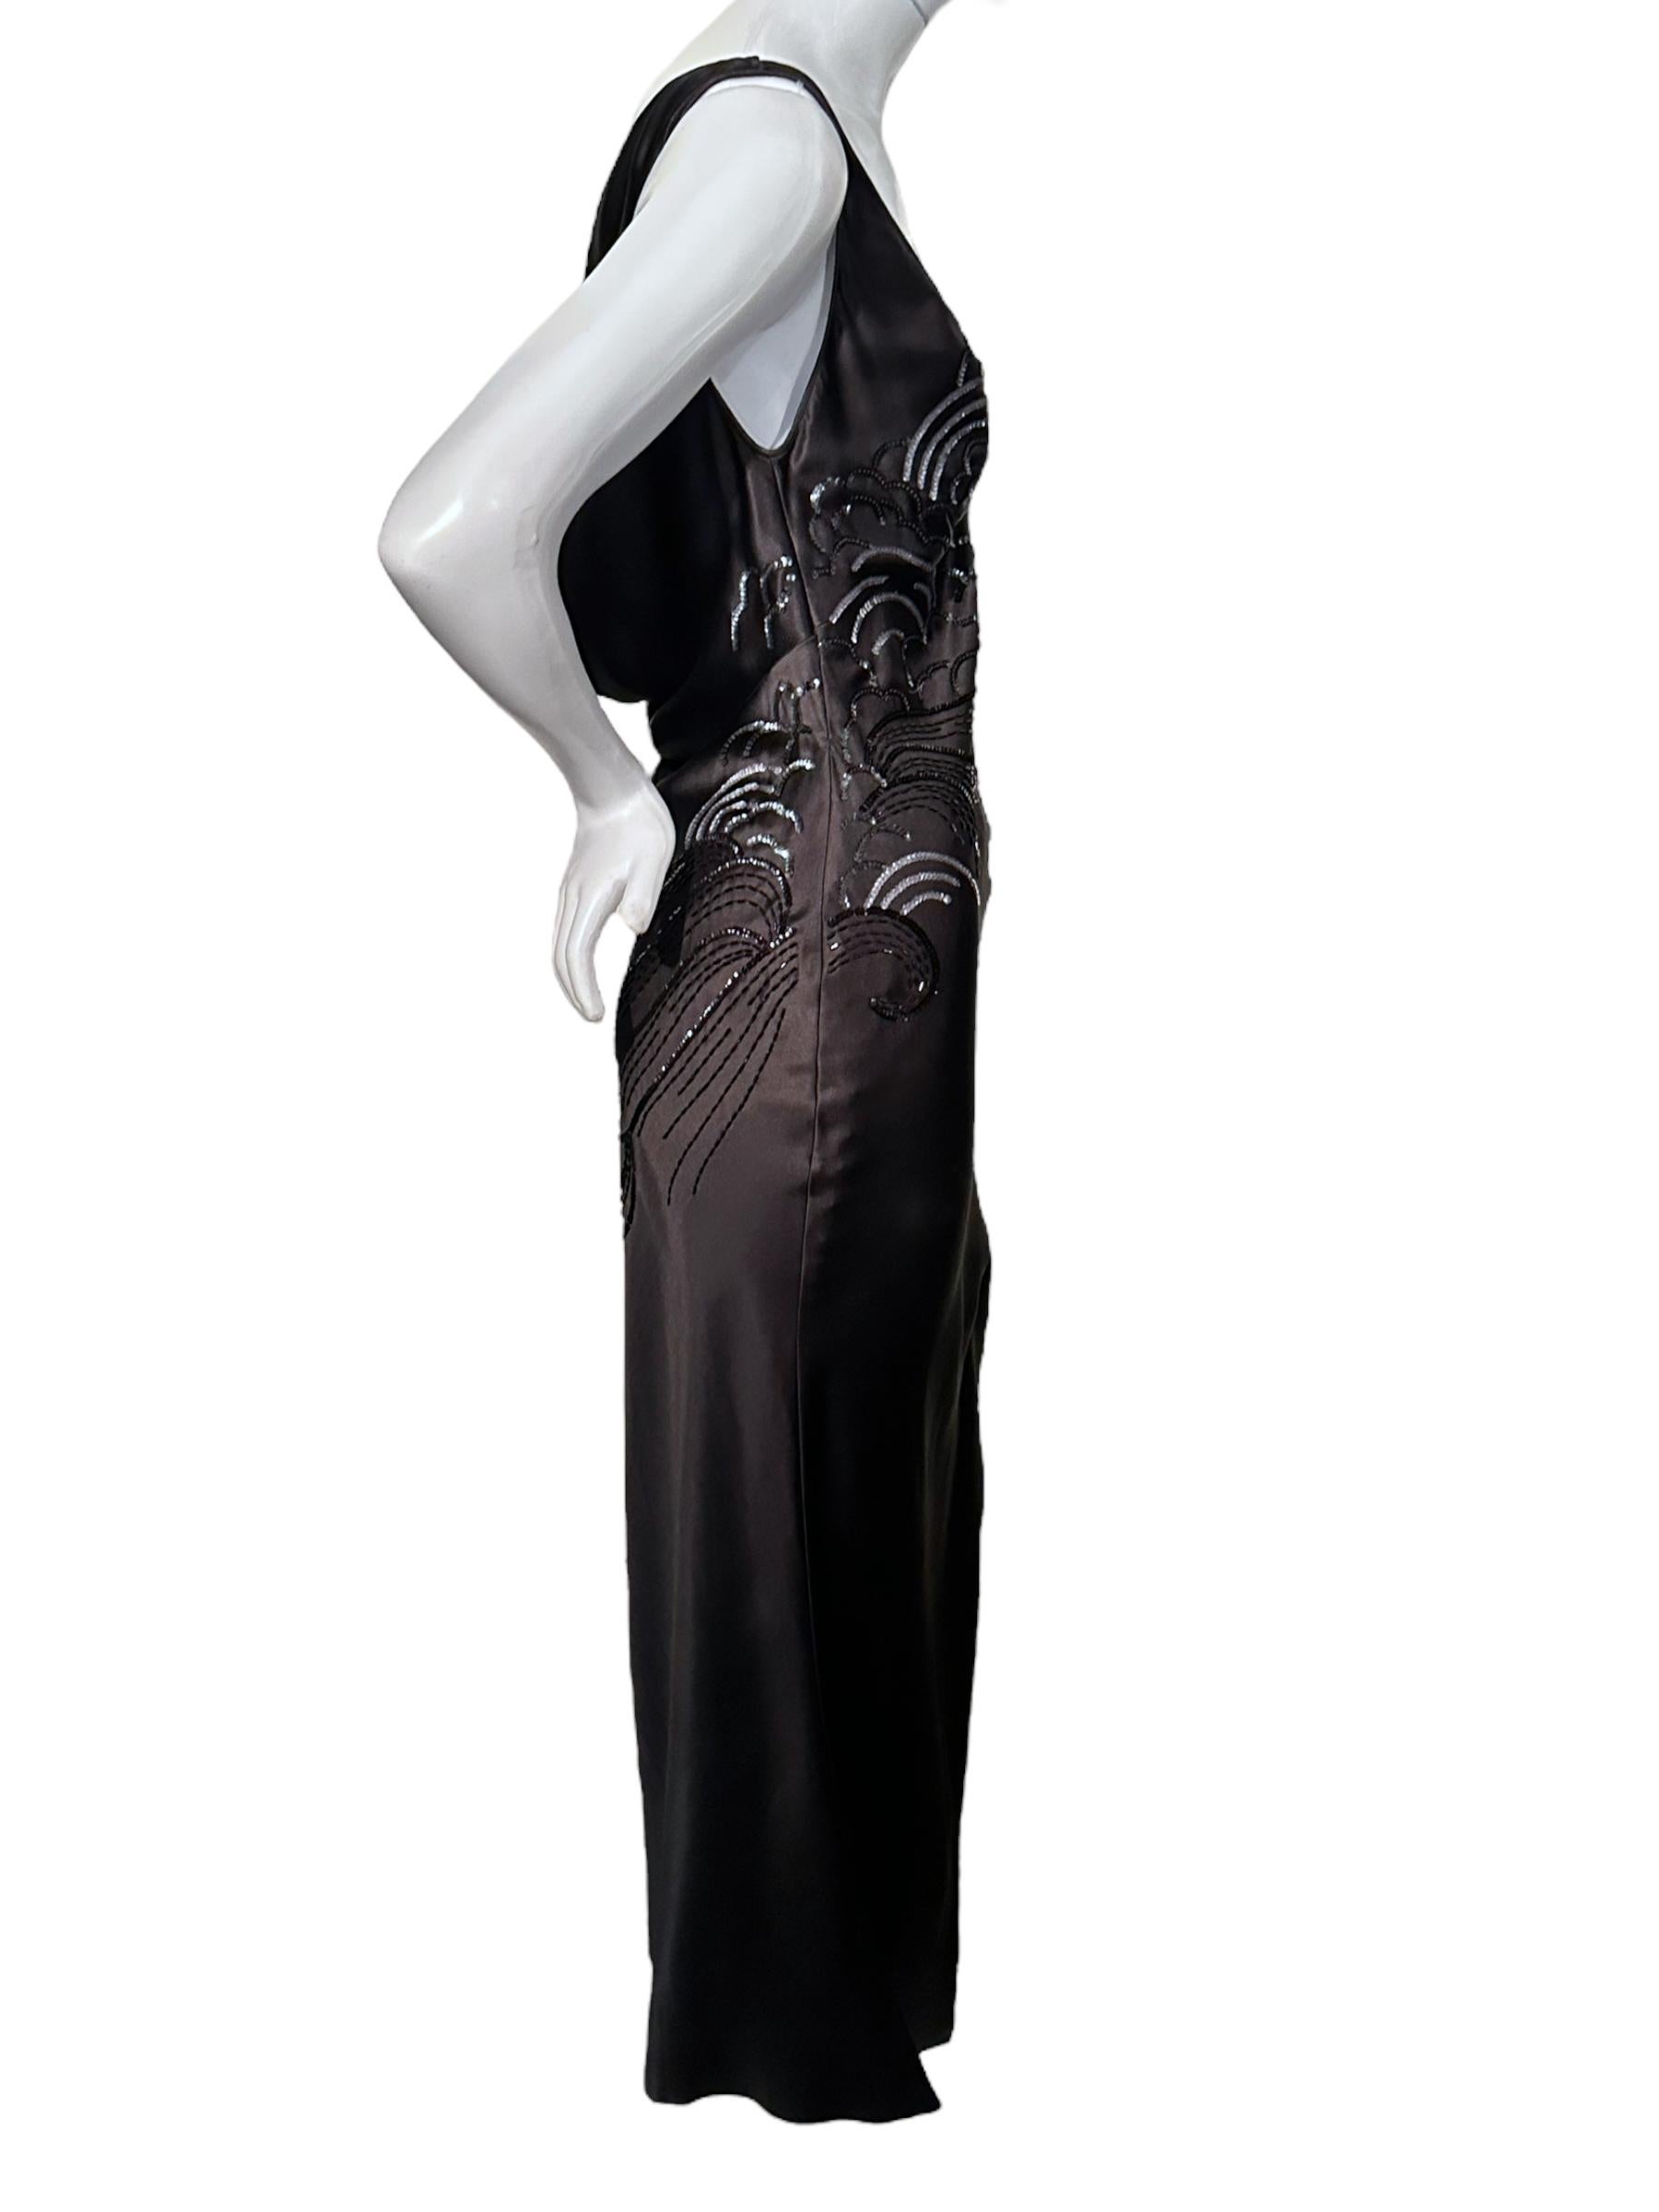 Women's Iconic Christian Dior By John Galliano Ss 2005 Beaded Bodice Black Gown For Sale